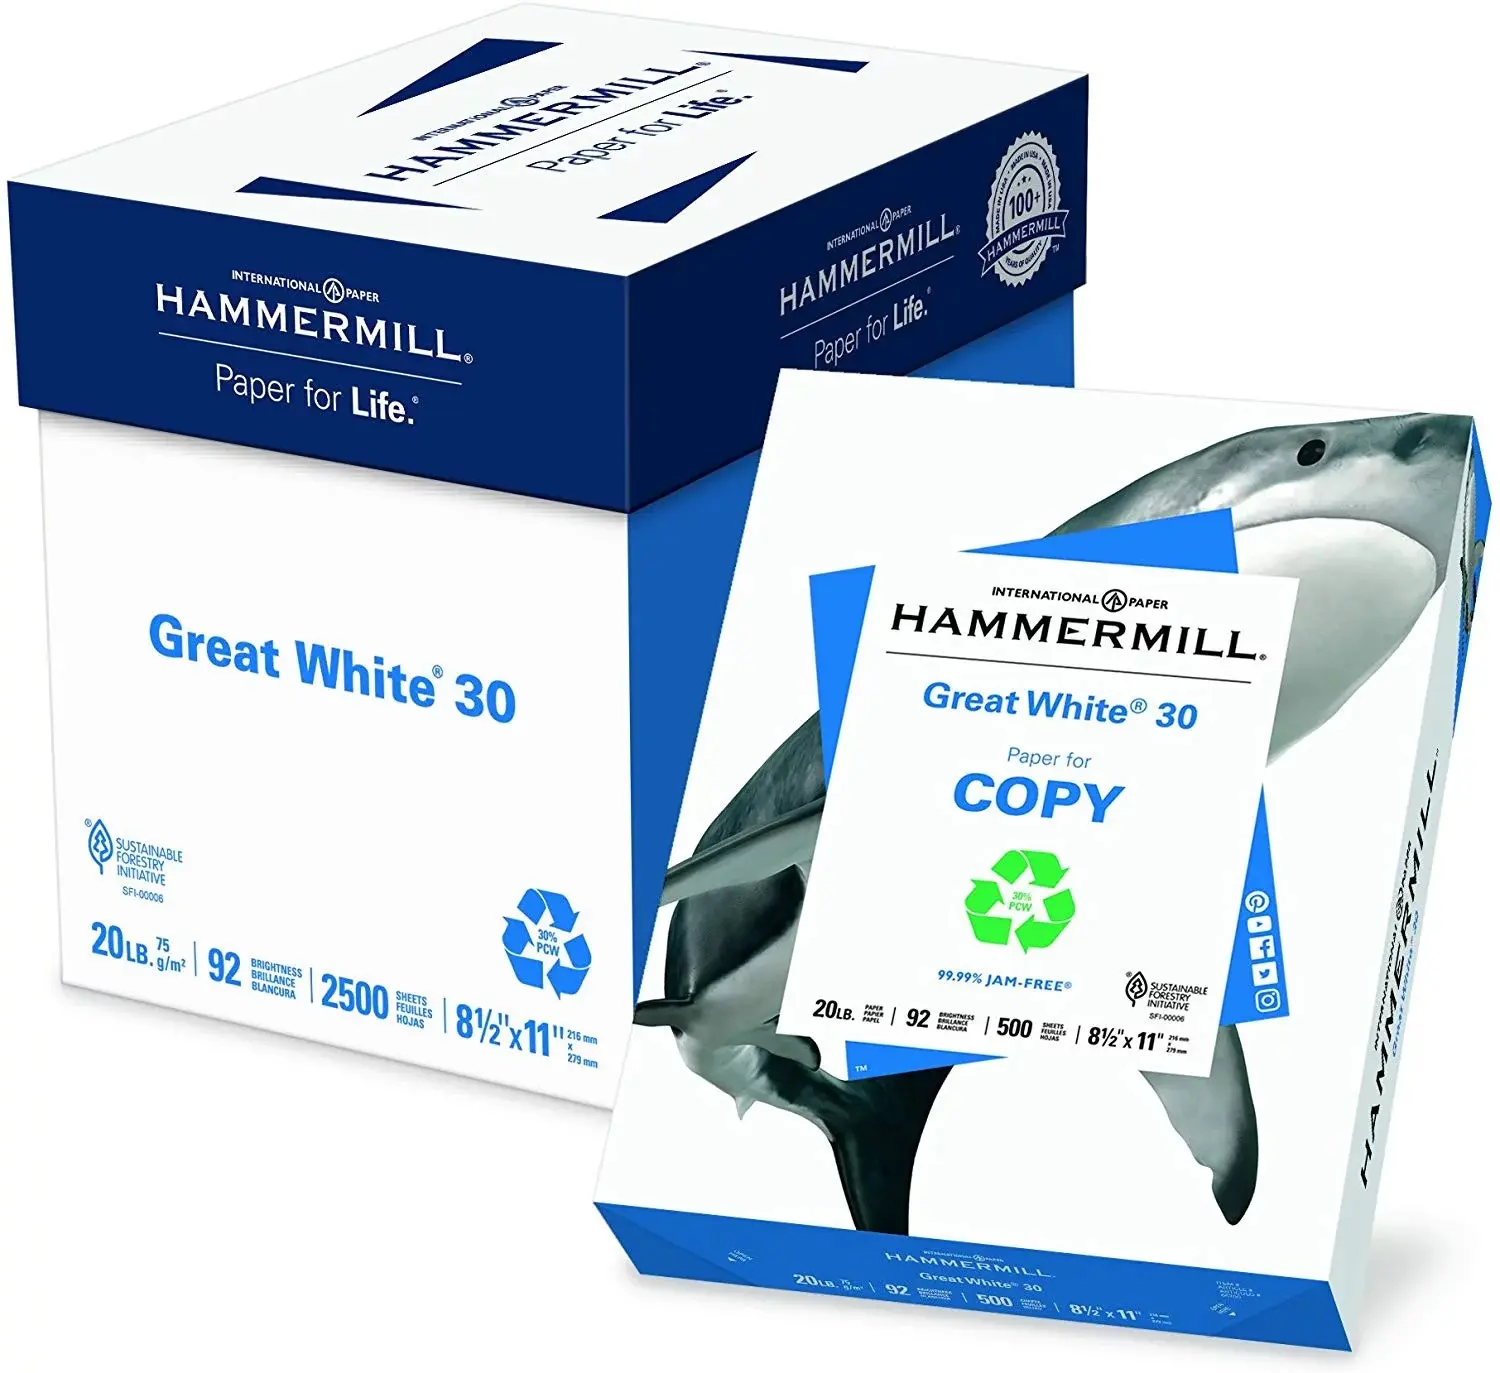 High Quality Wood Pulp Hammermill Paper, Office Printer Paper Best Factory Price